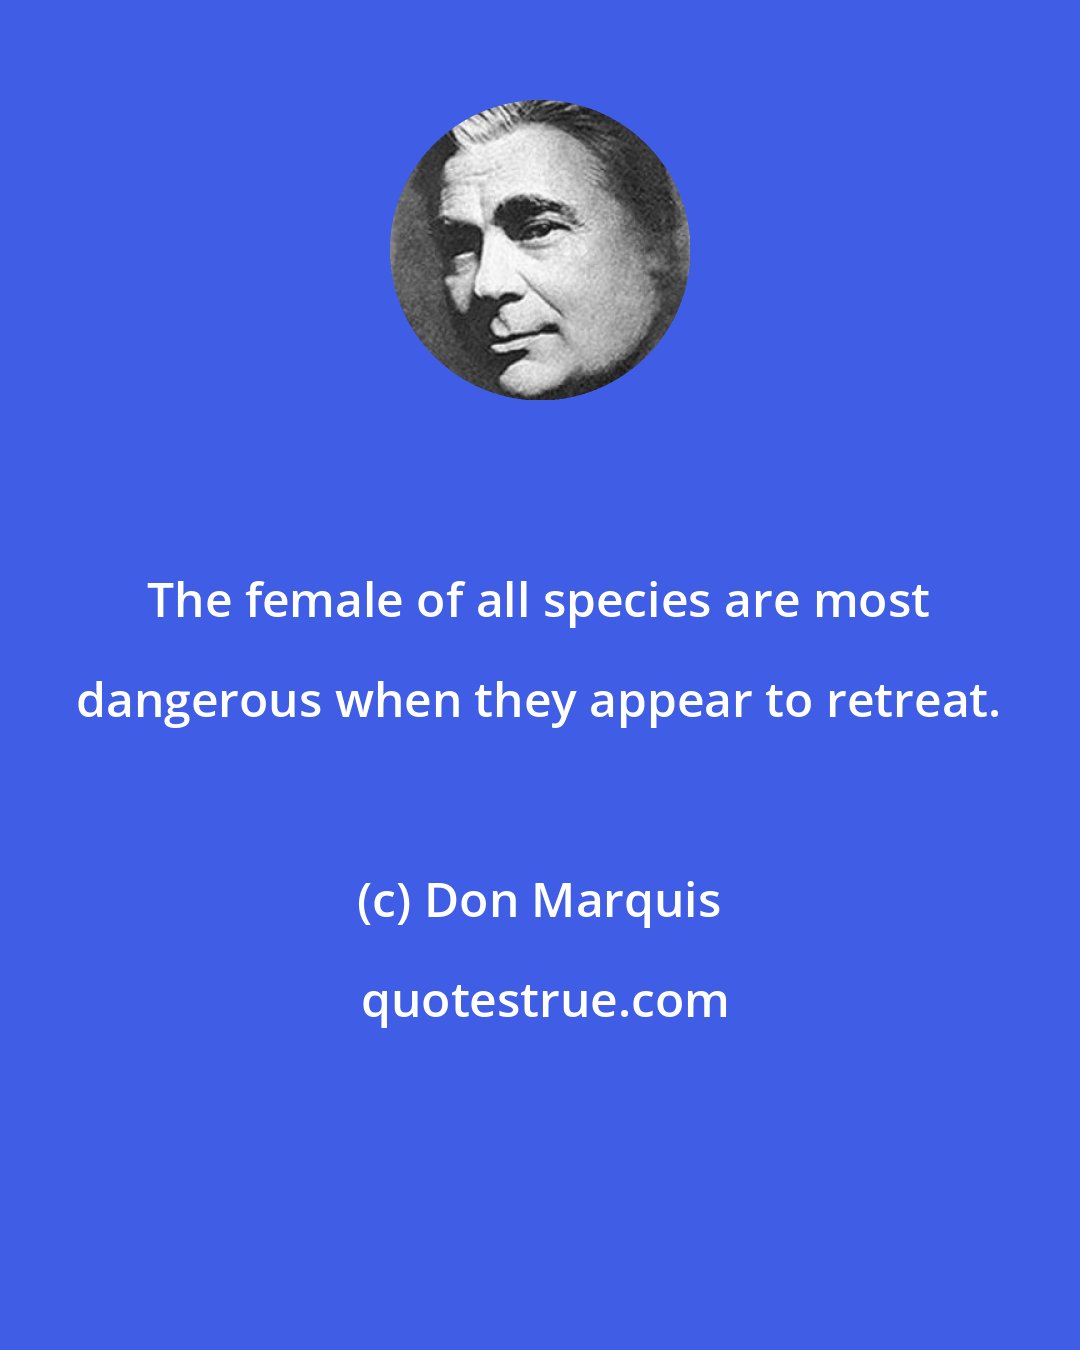 Don Marquis: The female of all species are most dangerous when they appear to retreat.